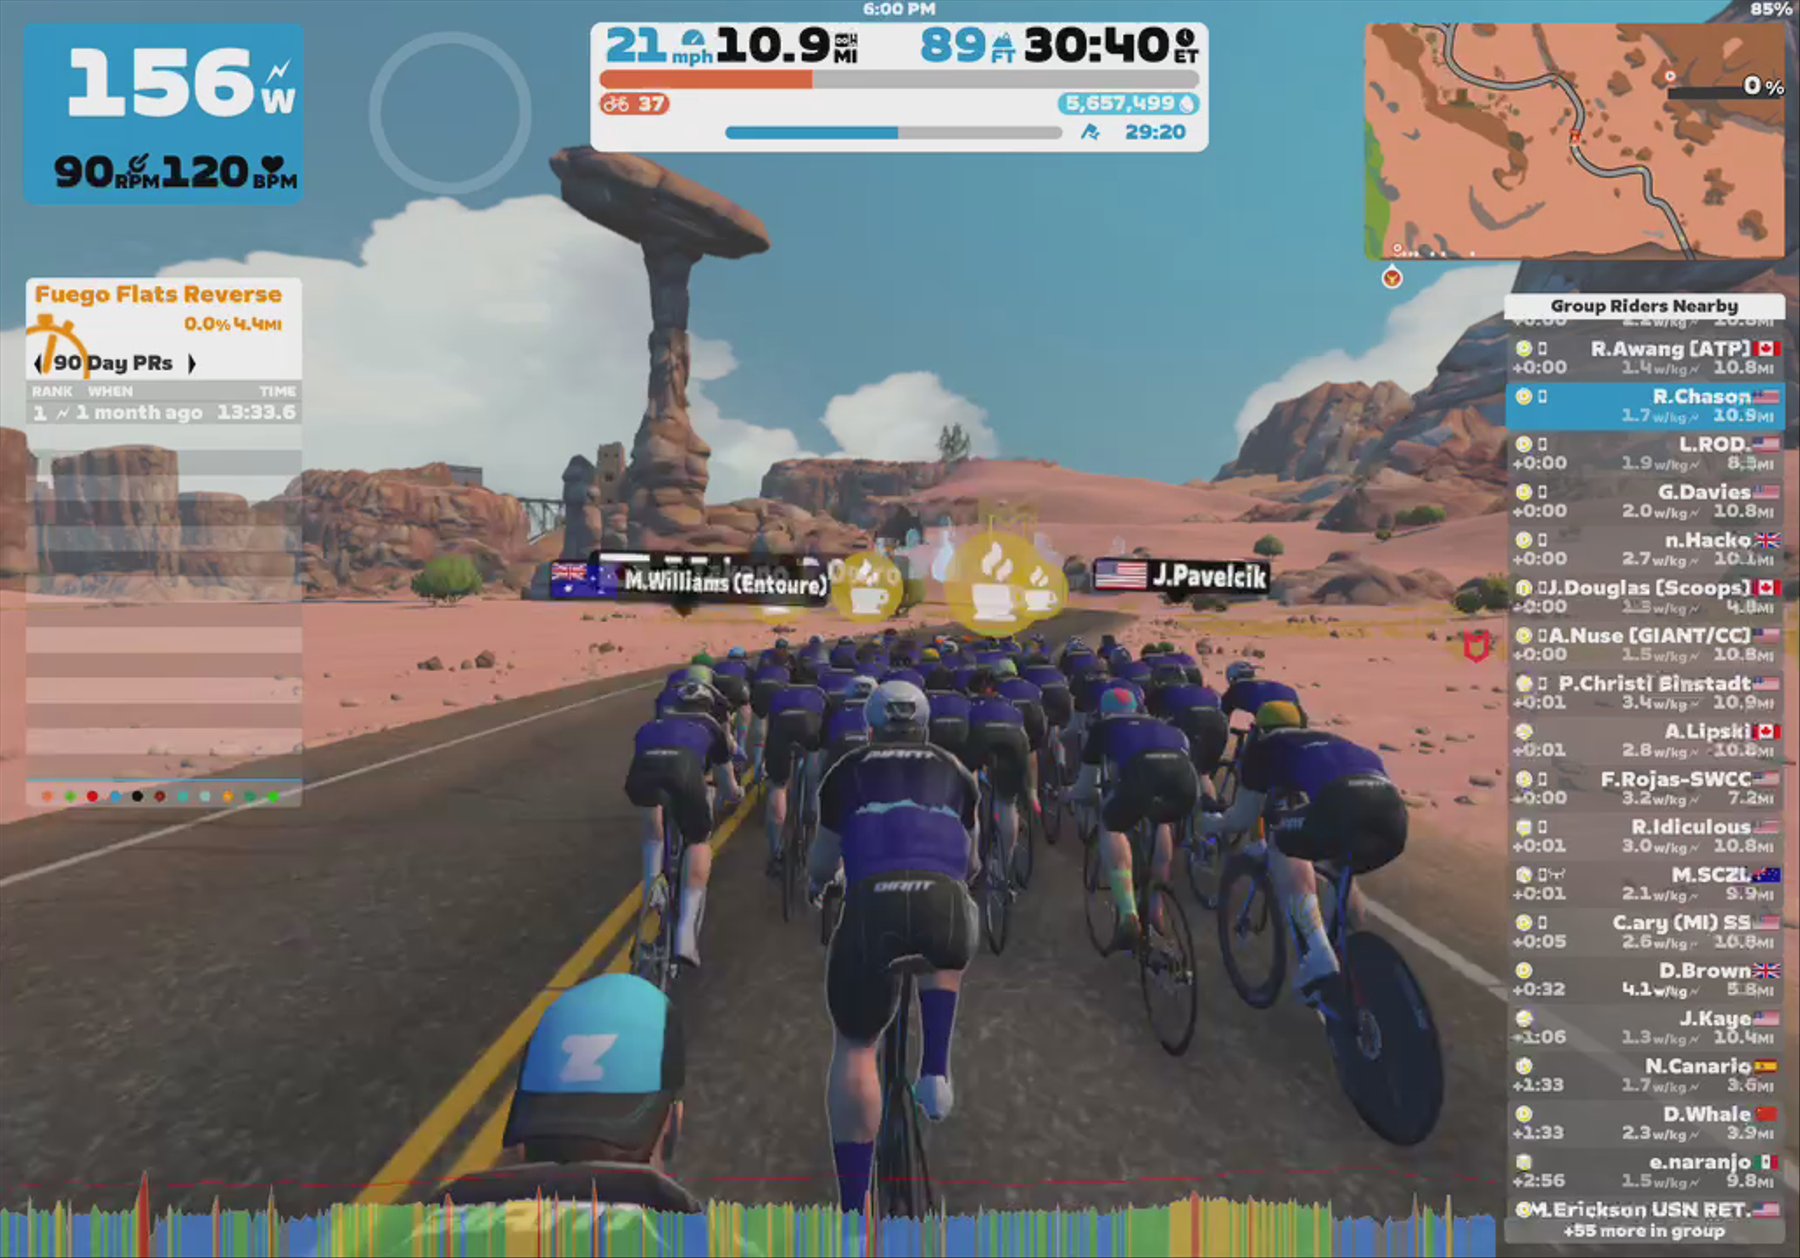 Zwift - Group Ride: Giant Tuesday Ride Series (D) on Tempus Fugit in Watopia